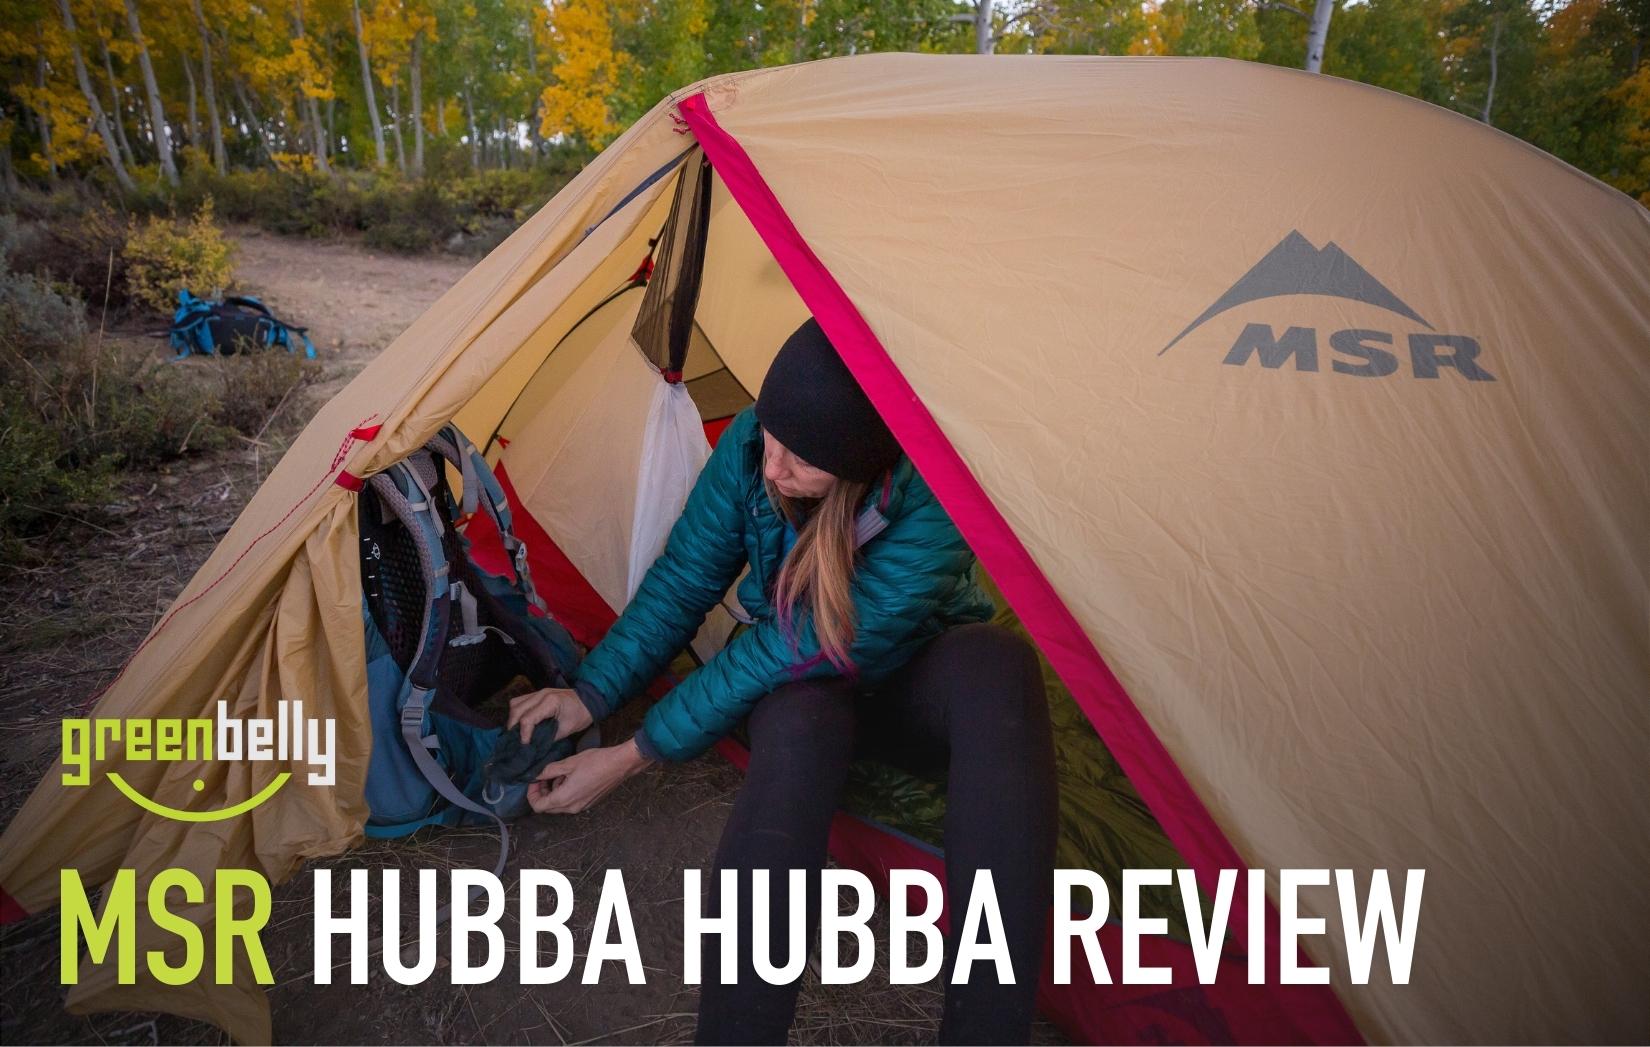 Hubba Hubba Review Greenbelly